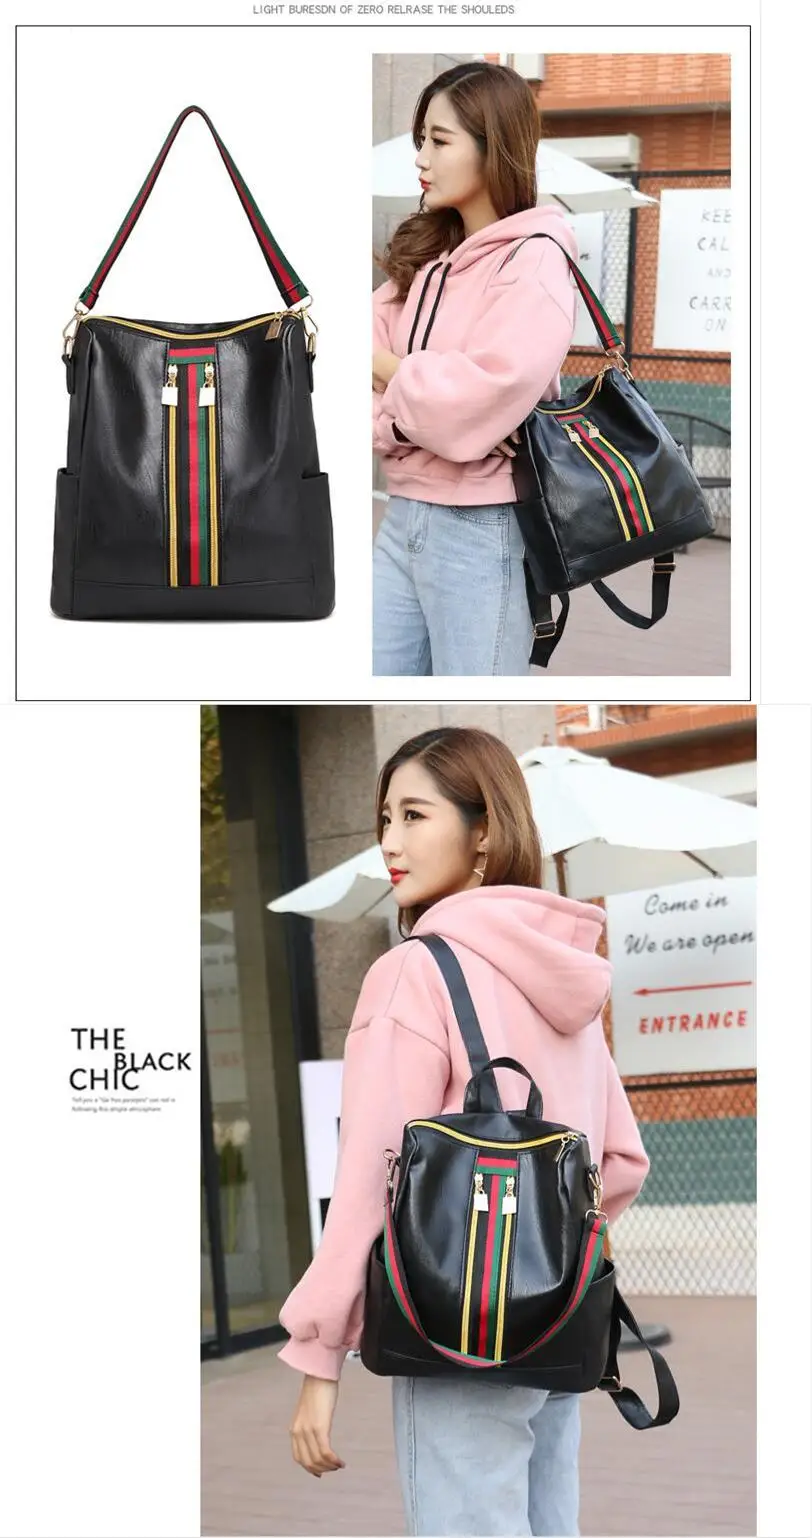 Soft PU Leather Backpack Women Vintage College Girls Student School Bags Casual Travel Female Rucksack